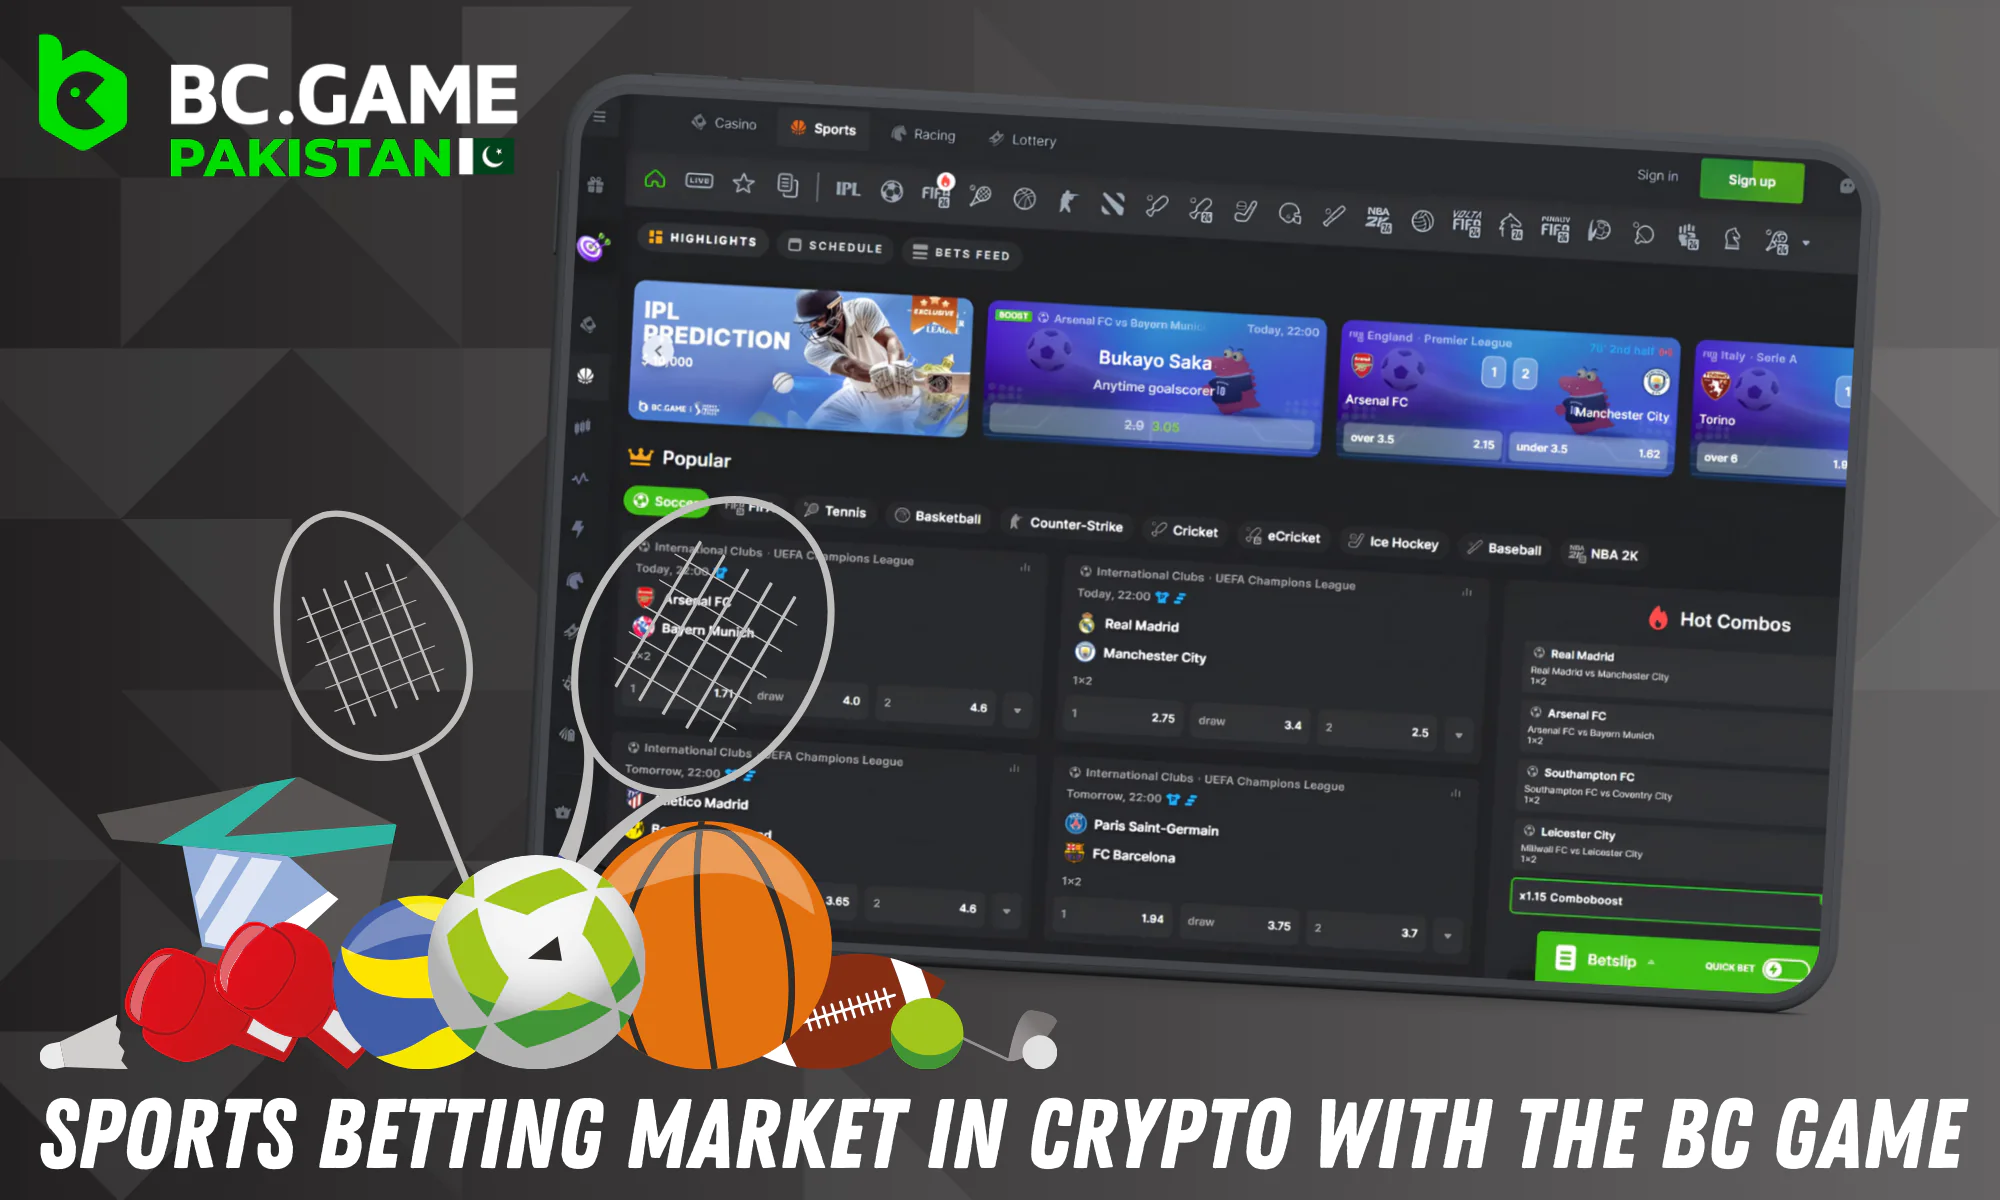 BC Game Pakistan offers an opportunity to bet on sports events with cryptocurrency